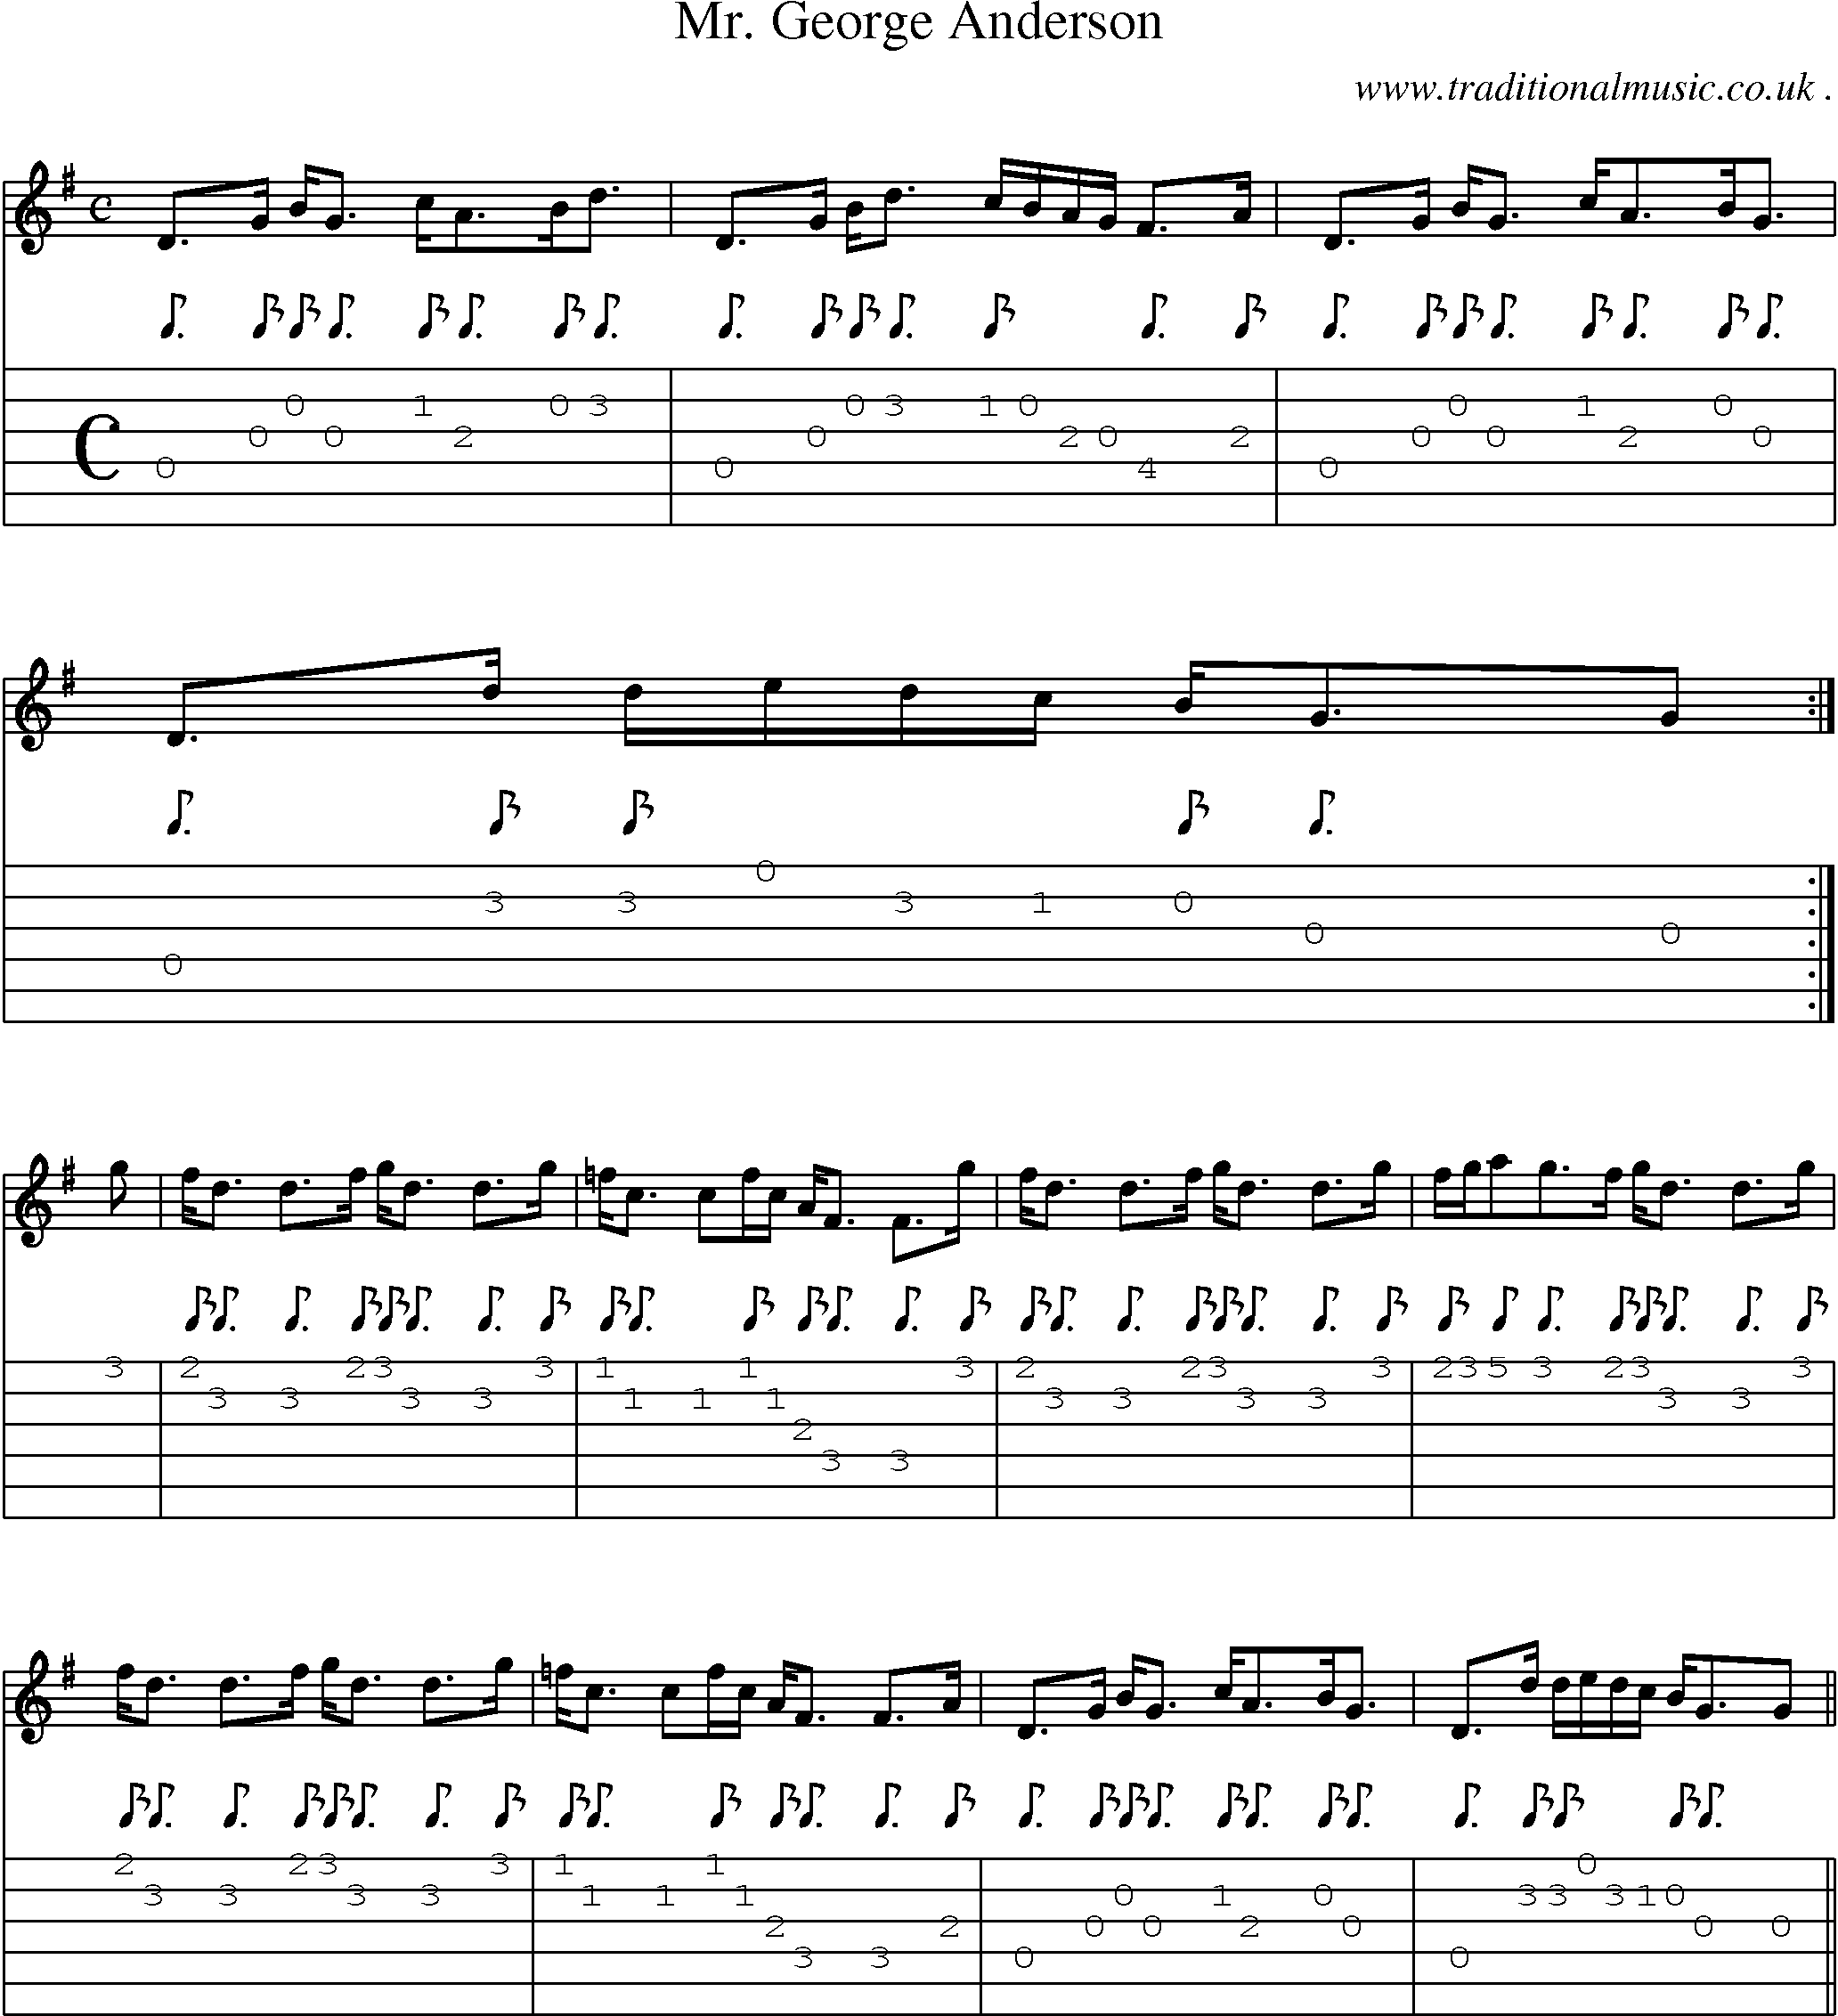 Sheet-music  score, Chords and Guitar Tabs for Mr George Anderson